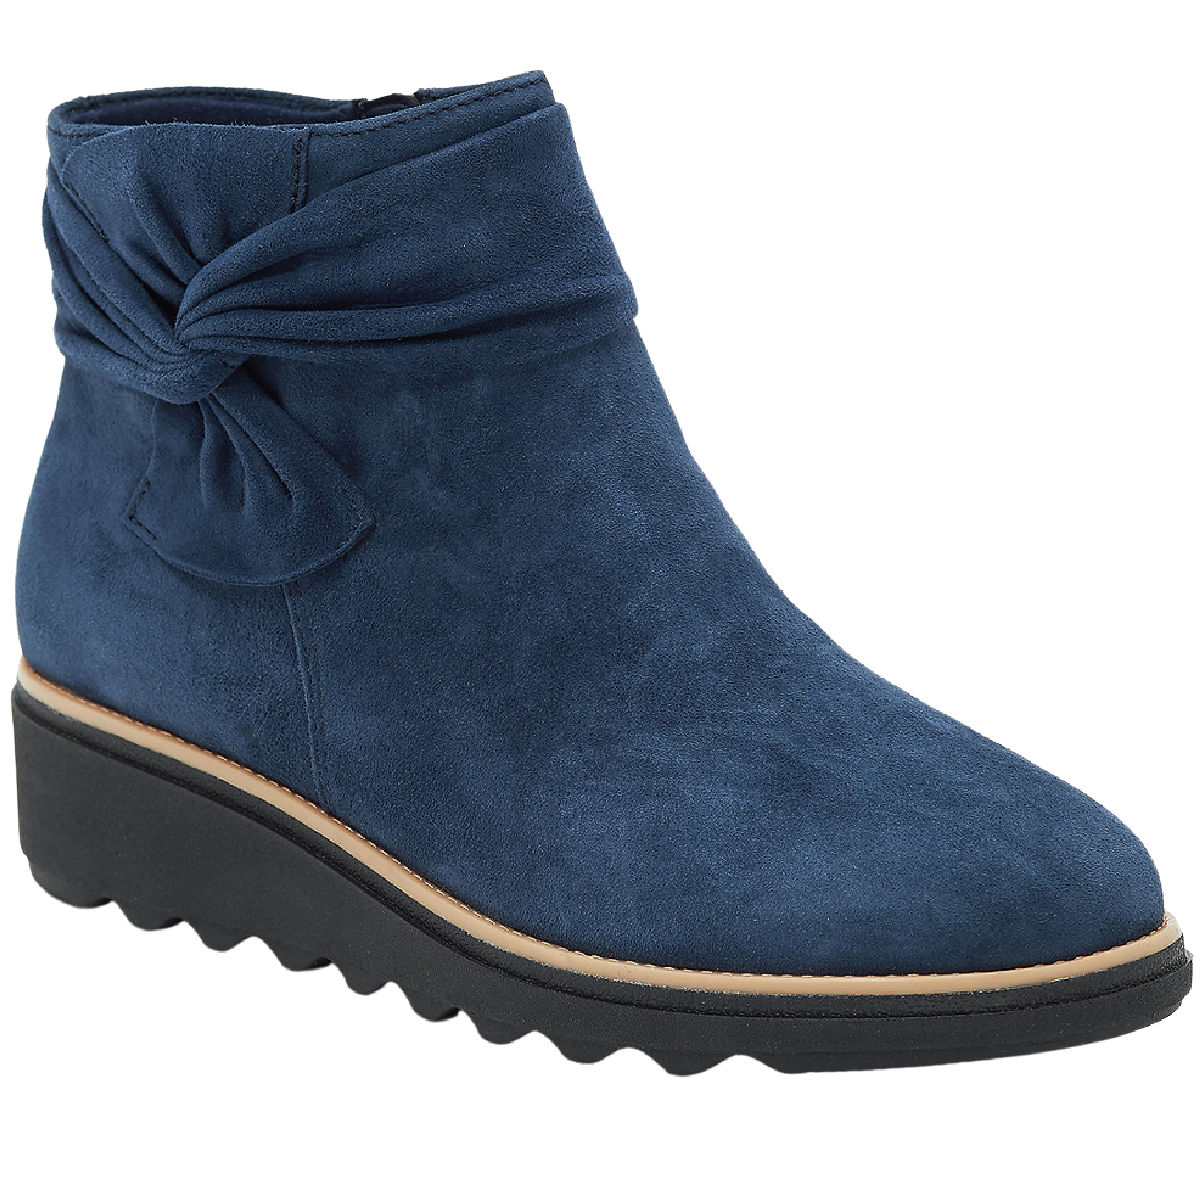 Clarks Collection Sharon Salon Suede Ankle Boots